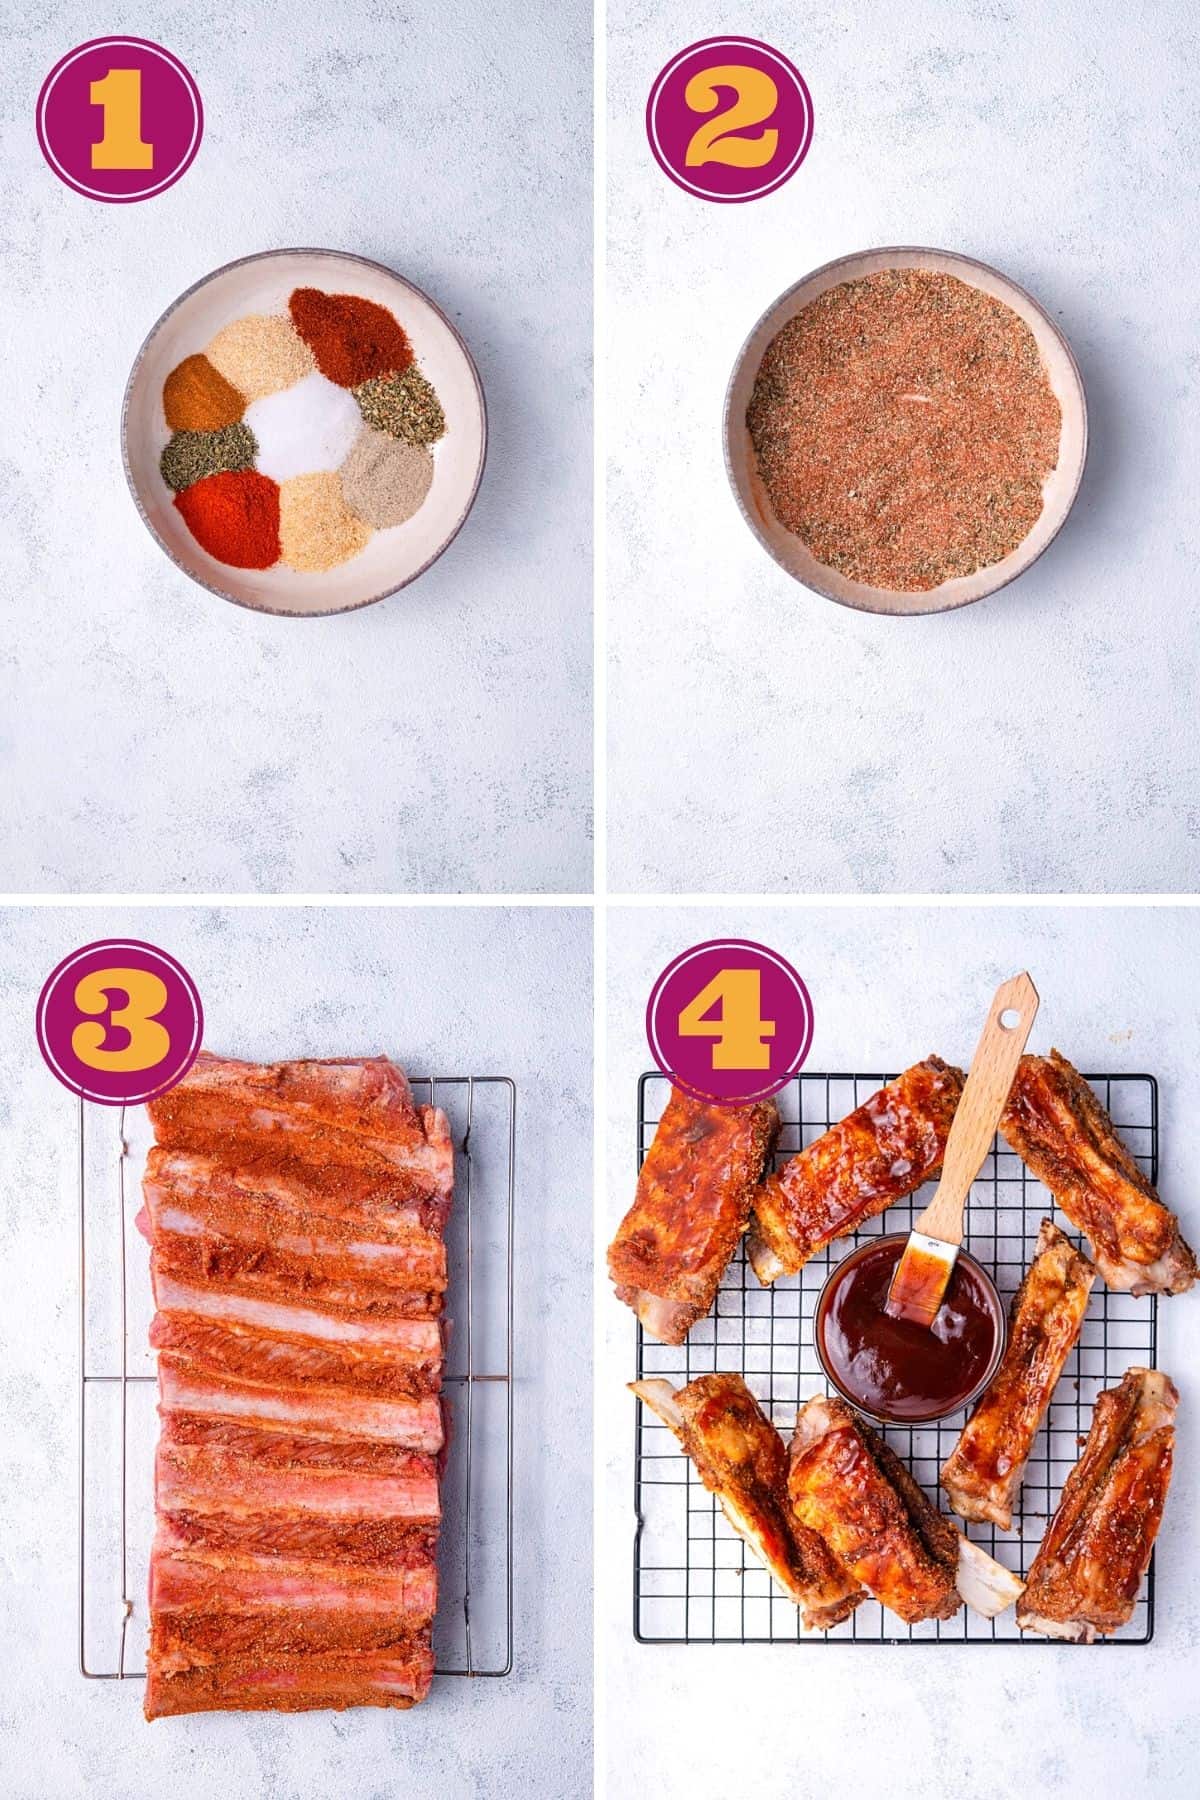 step-by-step instructions for how to make air fryer ribs